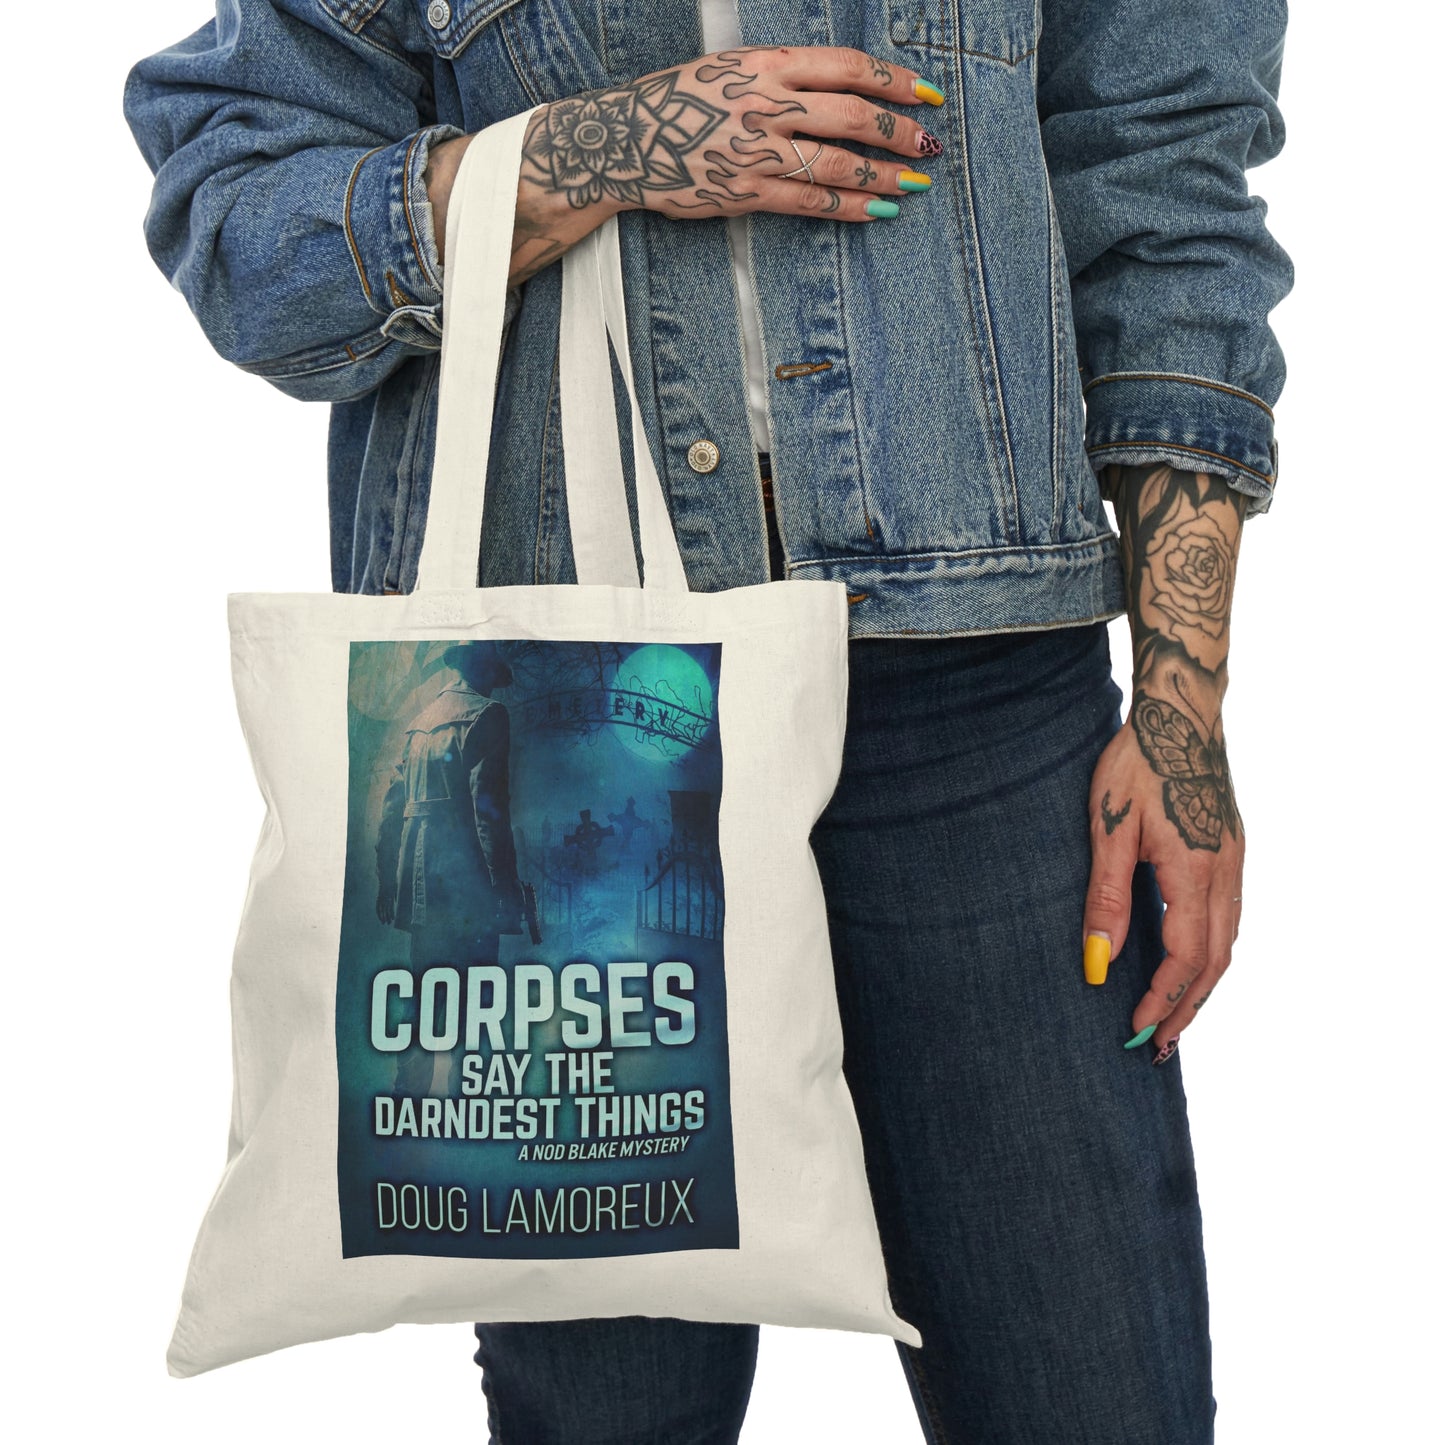 Corpses Say The Darndest Things - Natural Tote Bag